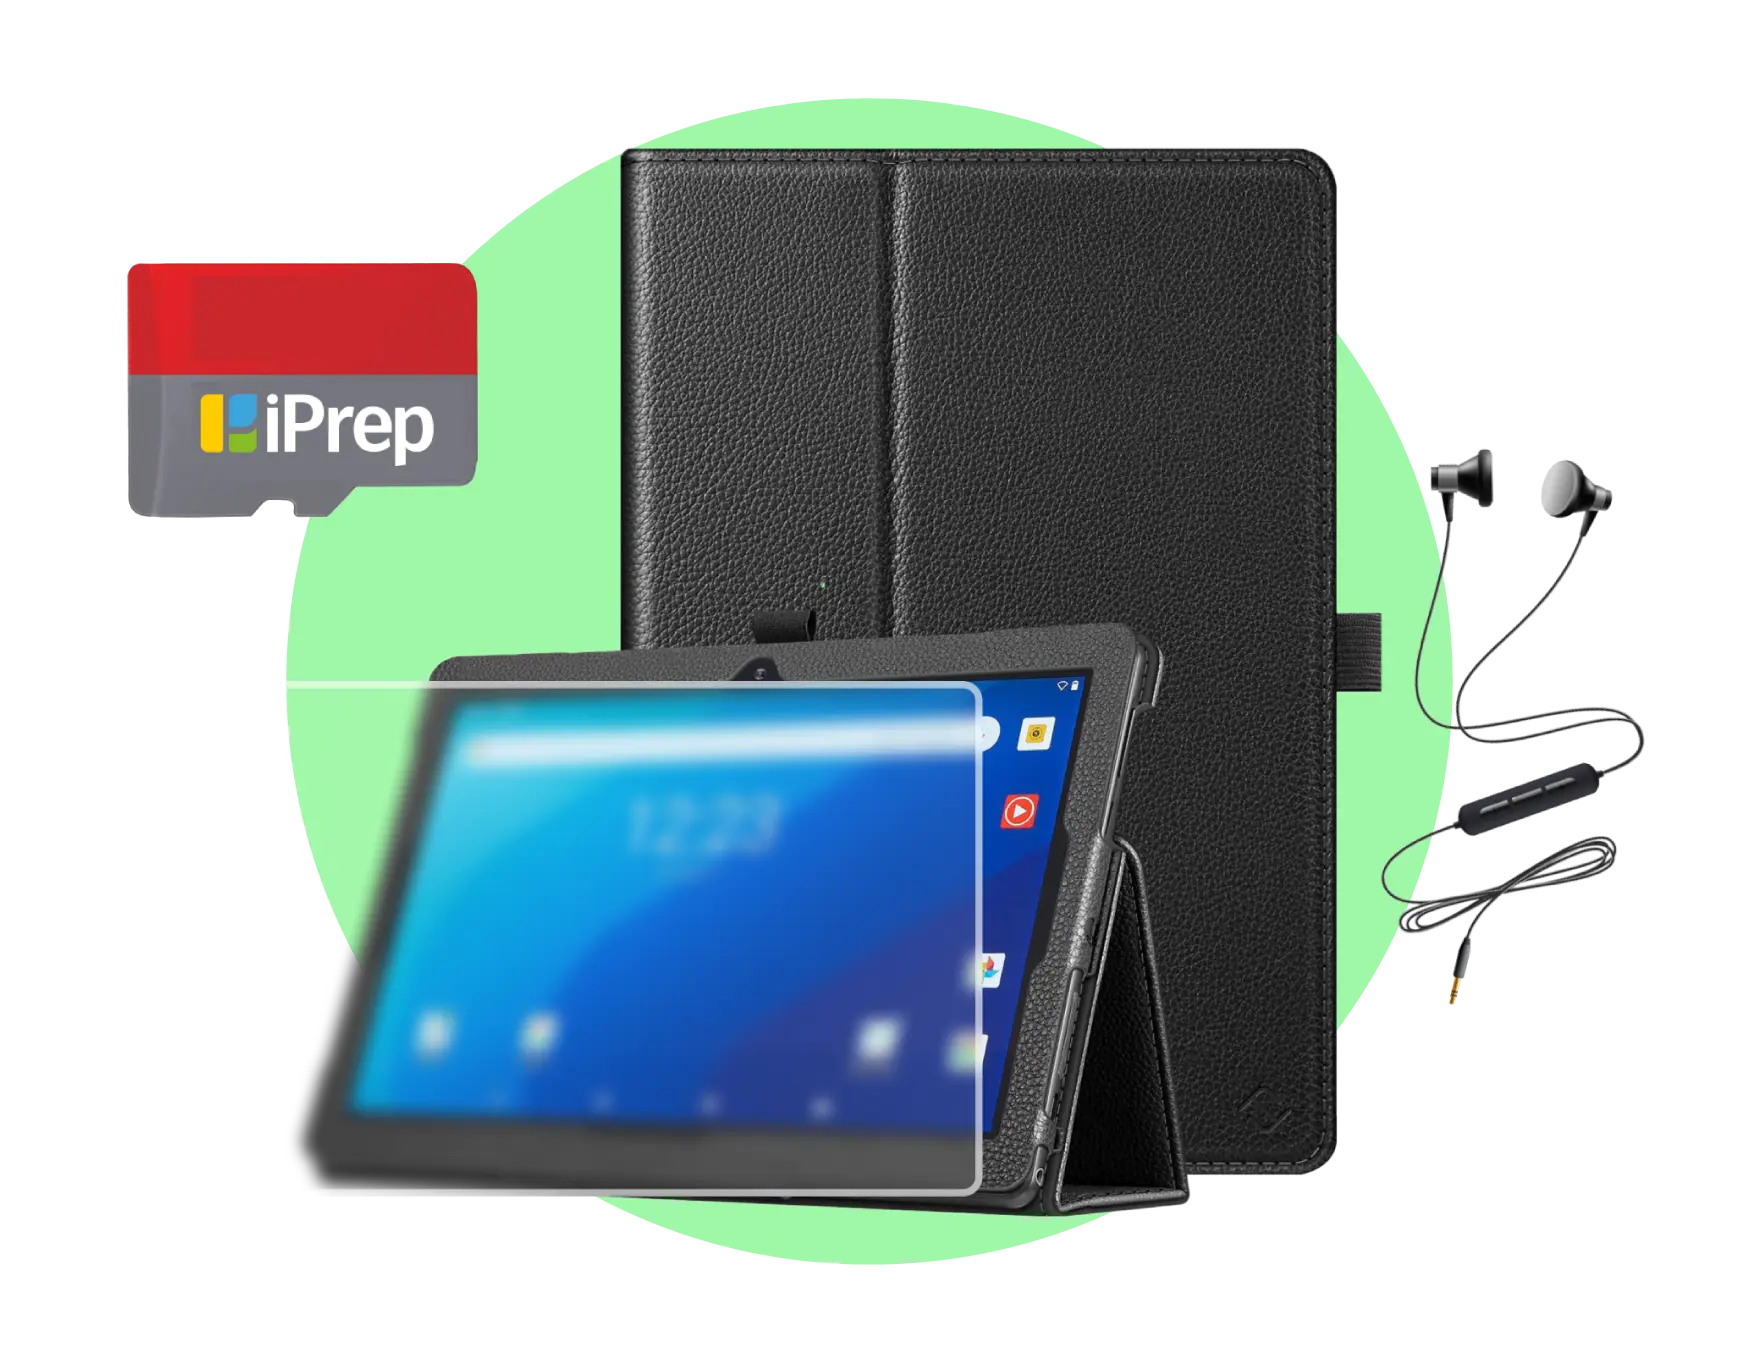 Discover Offline Digital Content for Android Tablets in Schools, enabling versatile learning with iPrep Tablets.